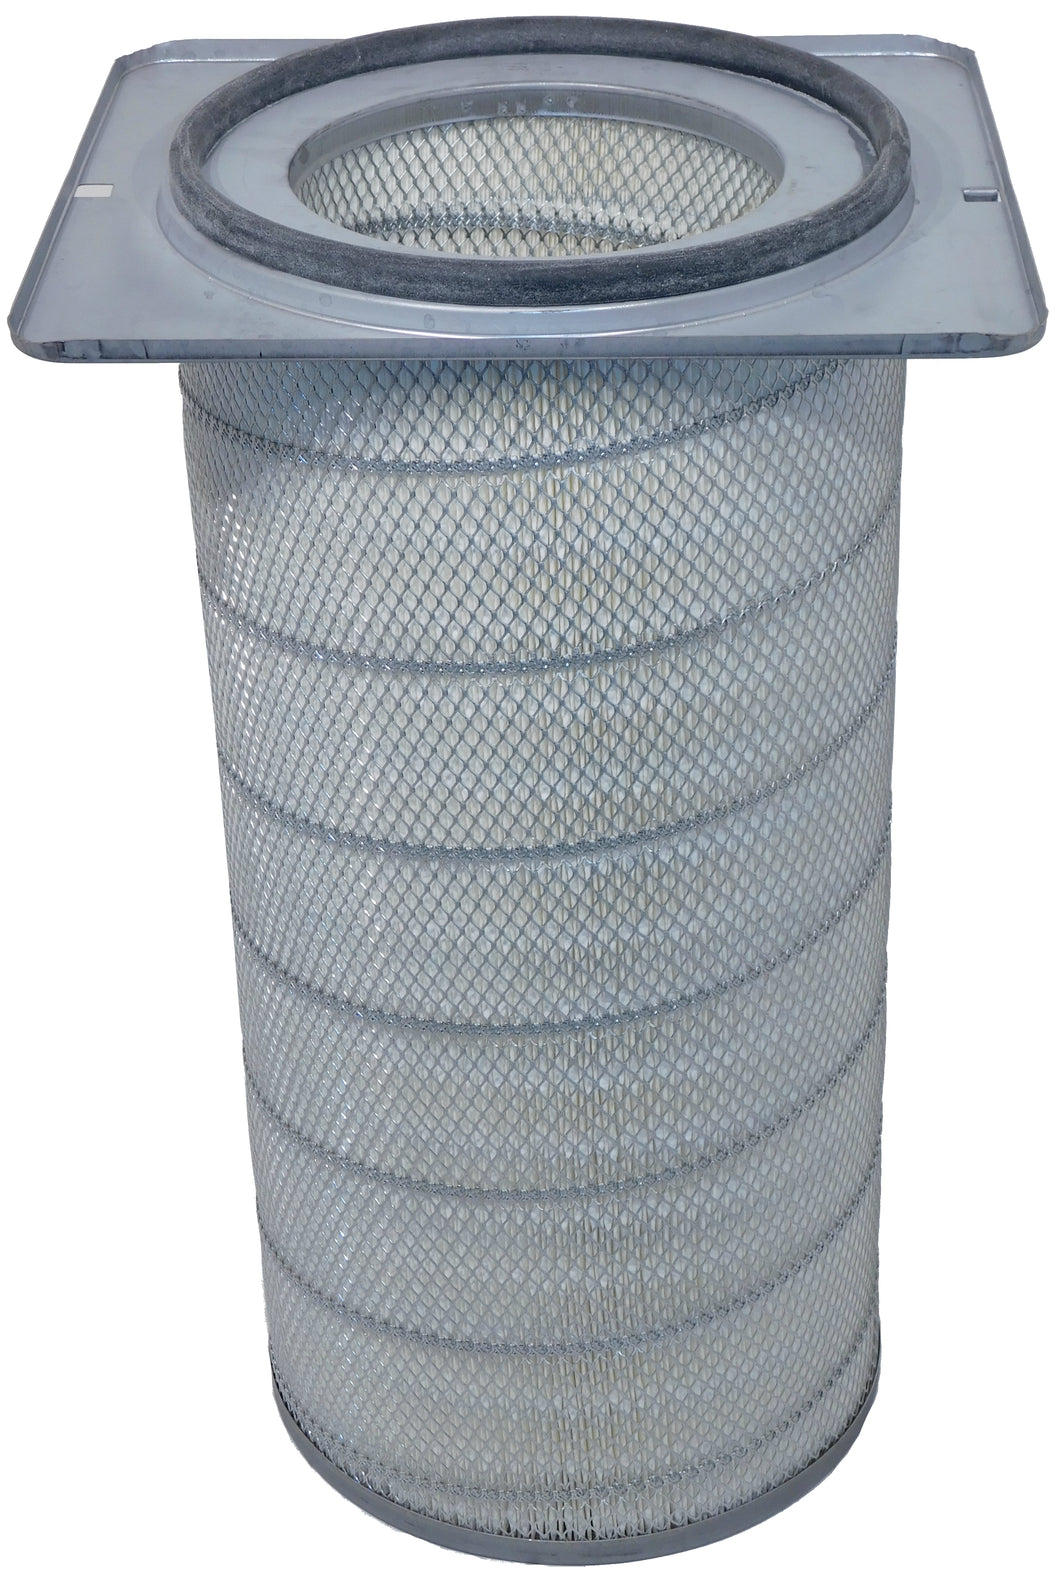 60-01-002 - Air Wall - OEM Replacement Filter